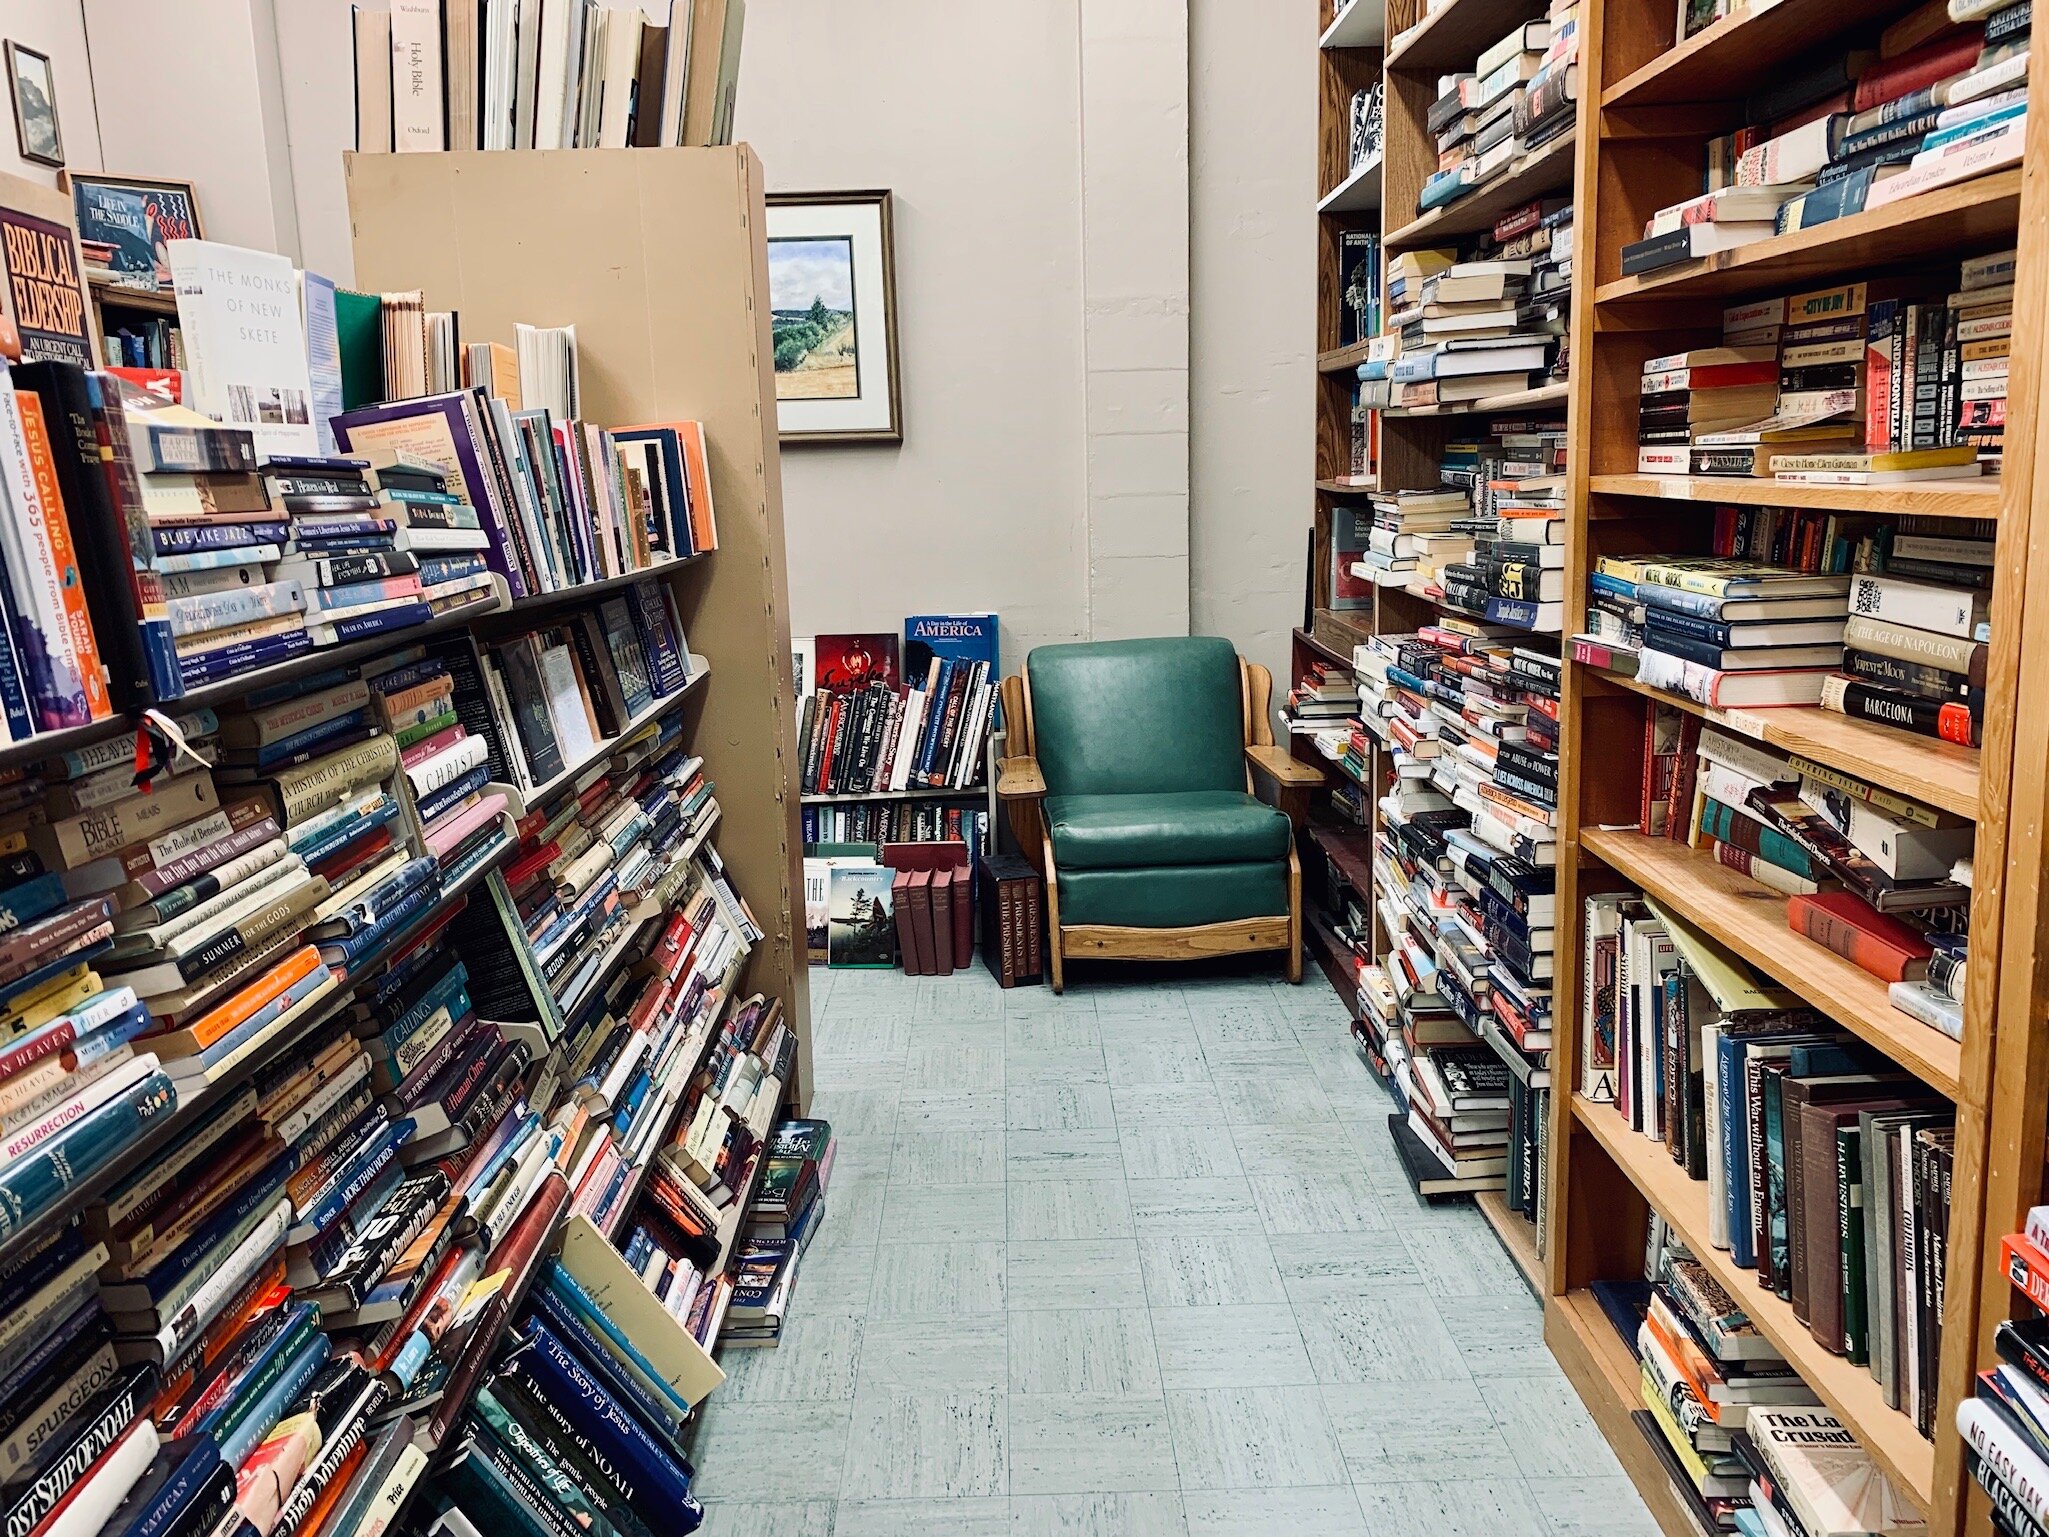  Guillermo’s performance began here. On Wednesday, October 30, 2019 he received a call from his favorite bookstore indicating that a book was waiting for him. That afternoon, he picked up the book and read it at the store. 